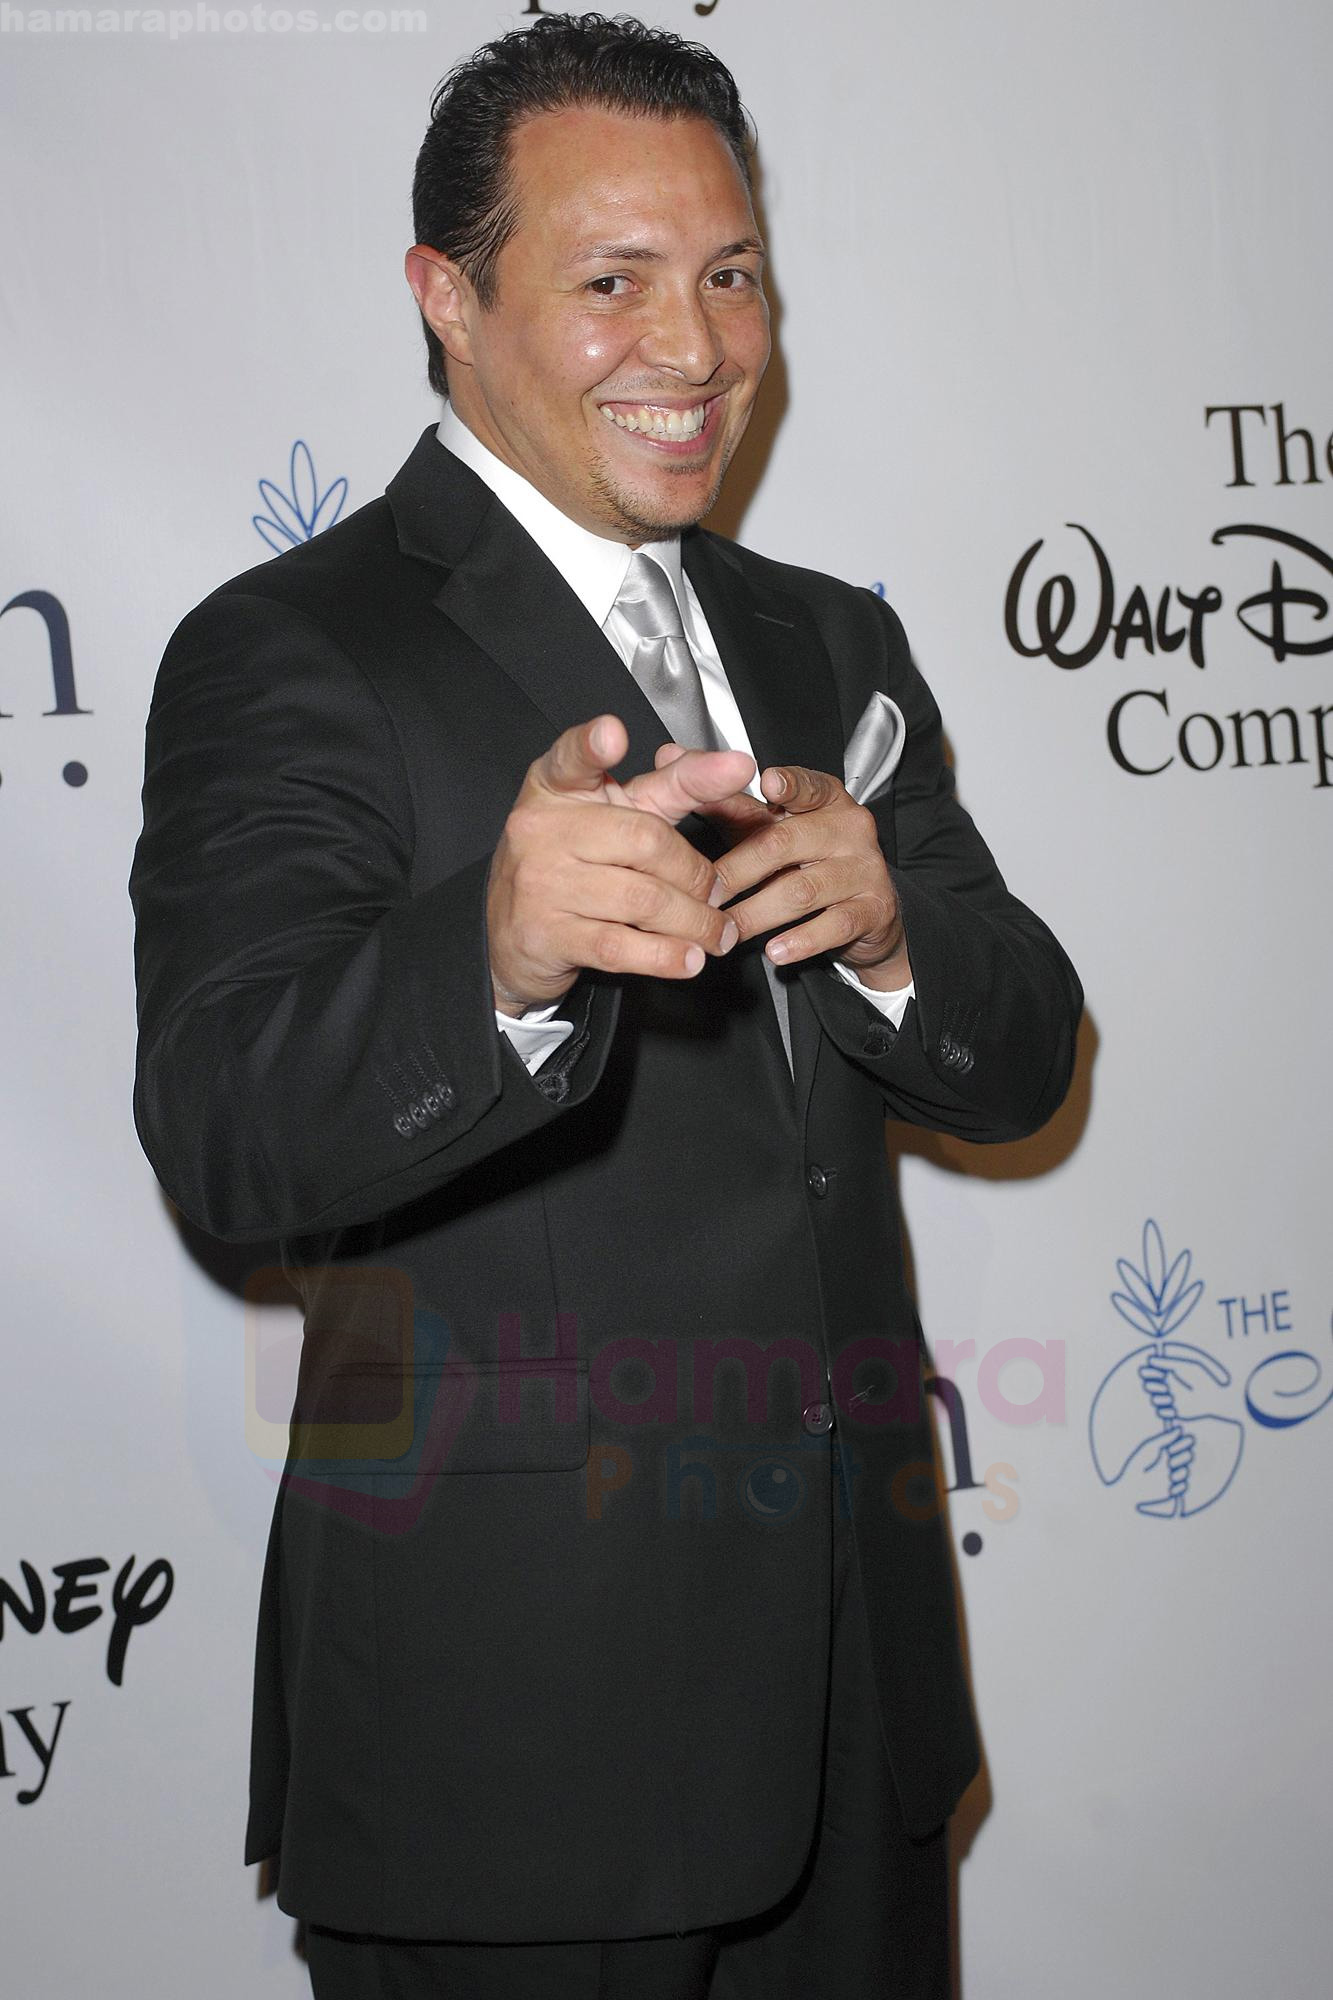 Hector Bustamante at the 24th Annual Imagen Awards held at the Beverly Hilton Hotel Los Angeles, California on 21.08.09 - IANS-WENN